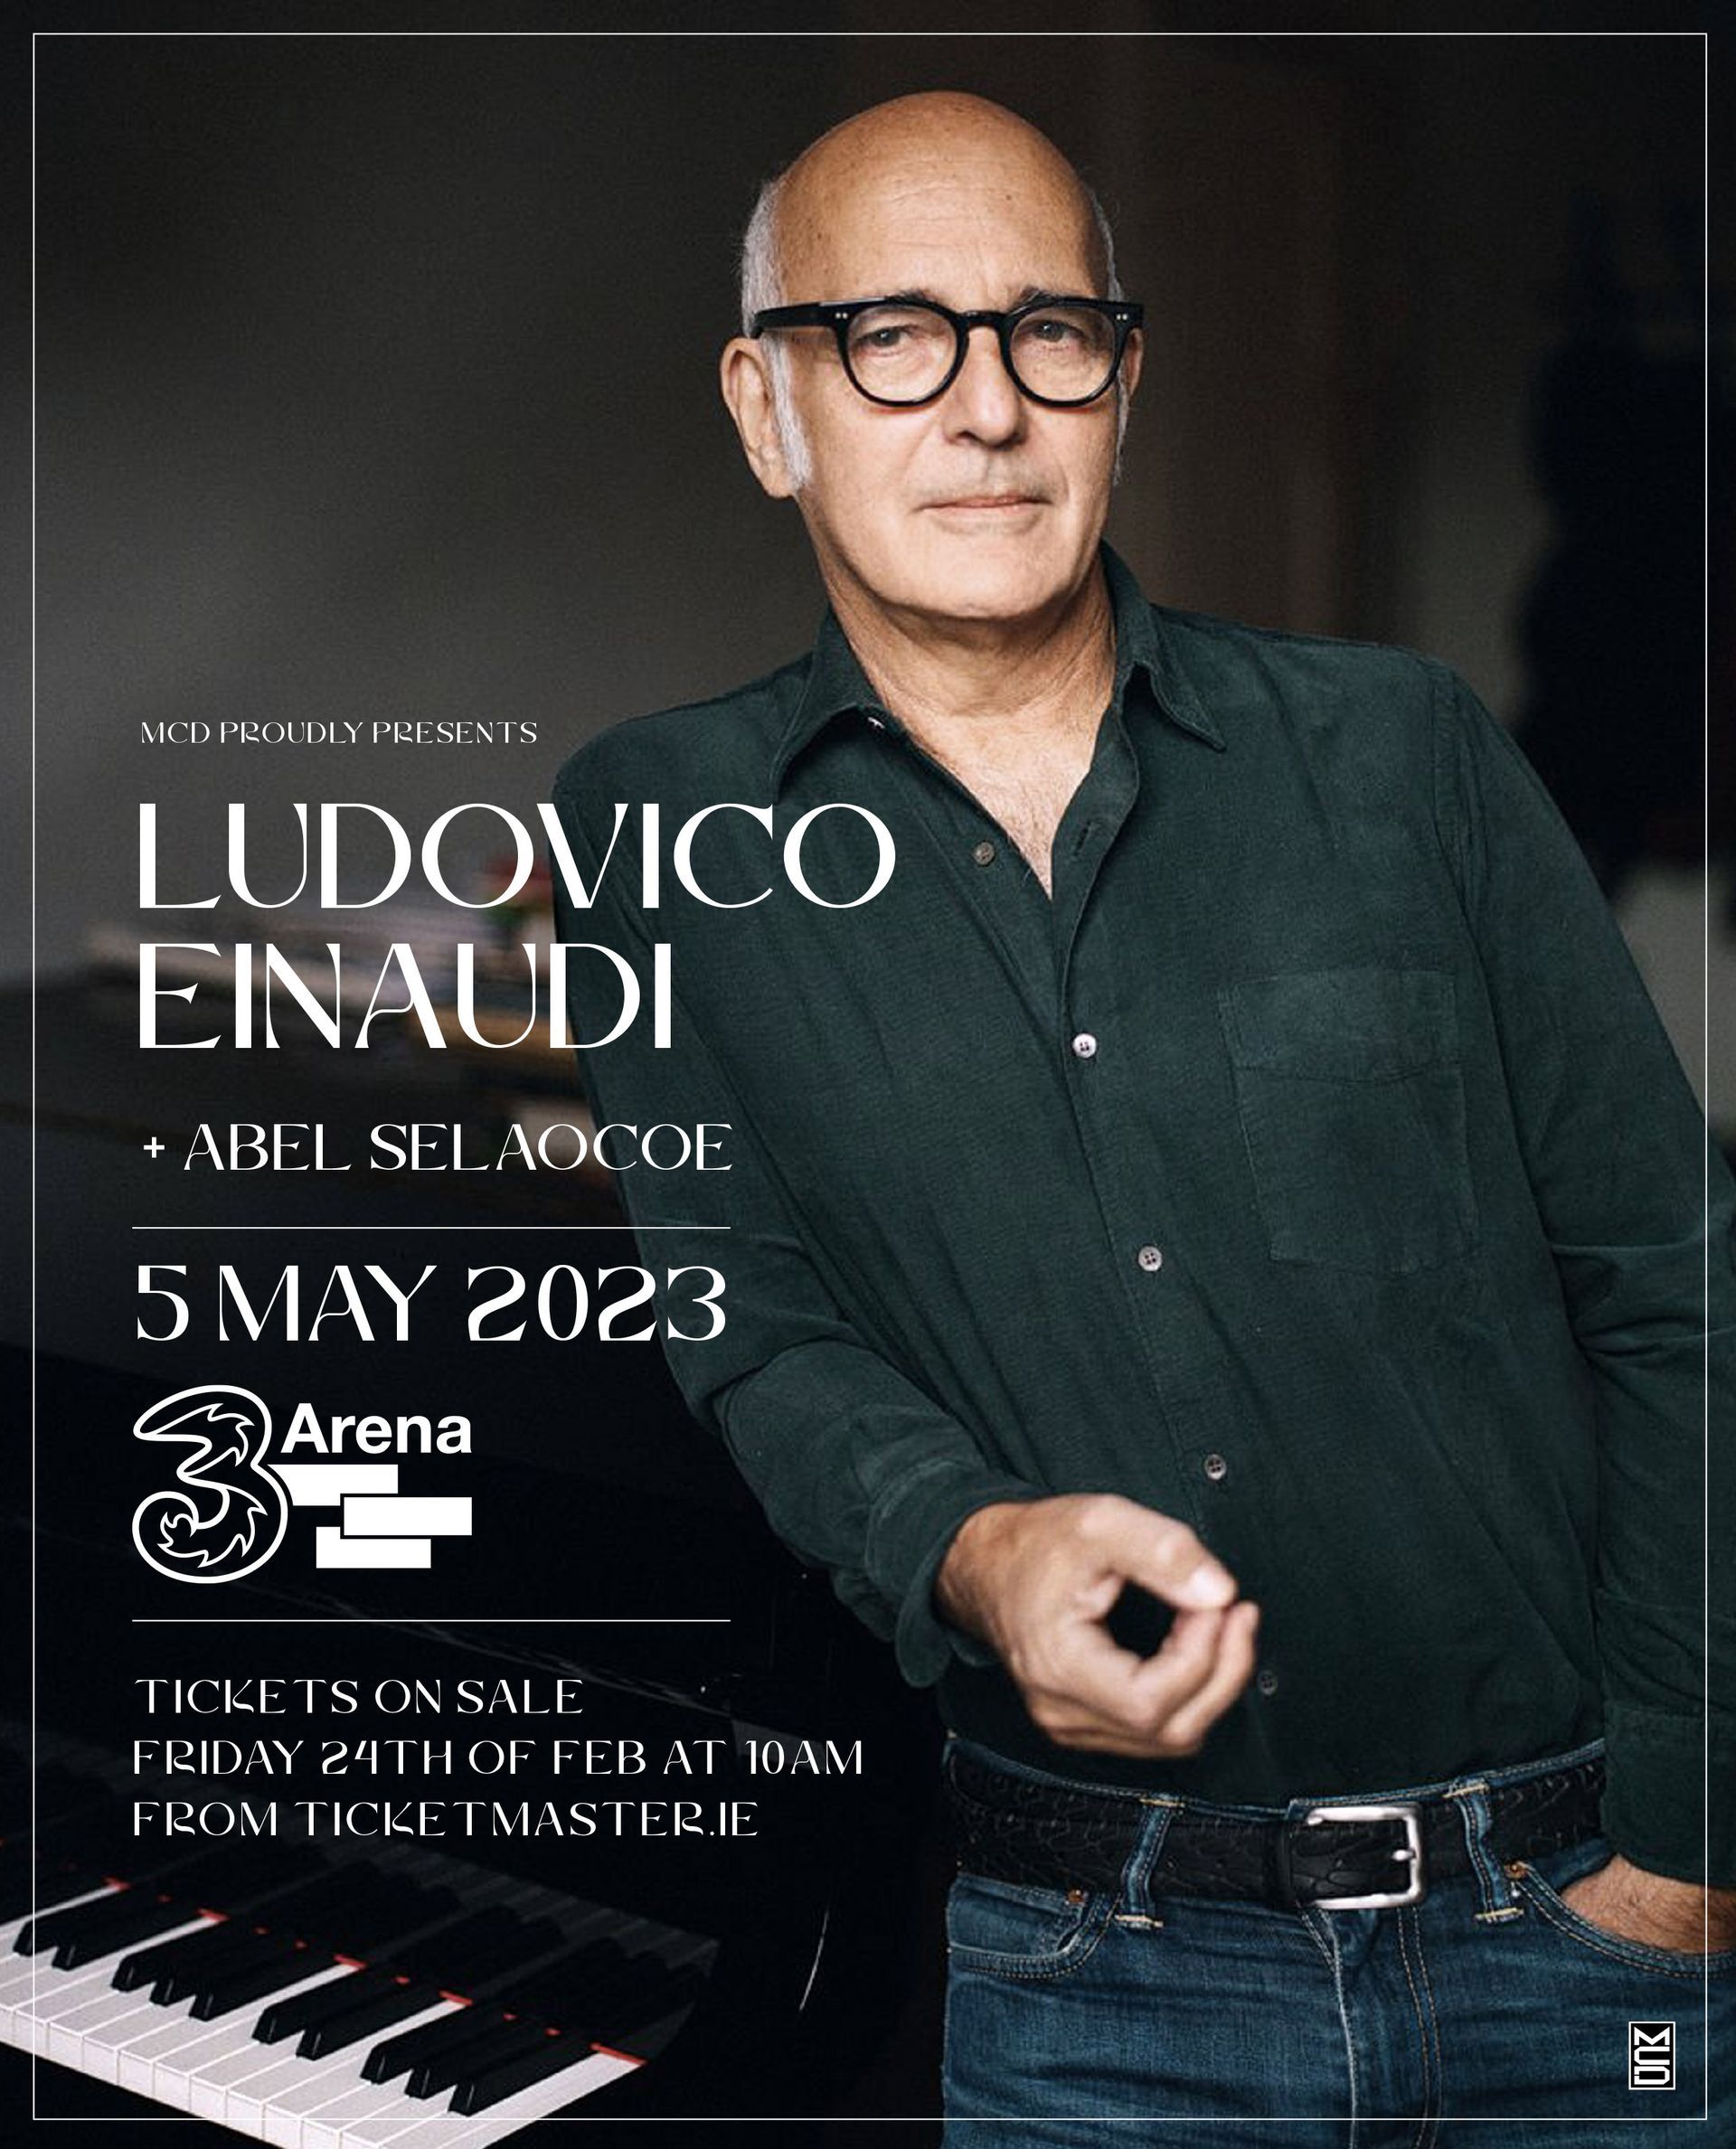 Ludovico Einaudi   With Special Guest Abel Selaocoe   3Arena Dublin Concert Date Confirmed  Tickets On Sale This Friday